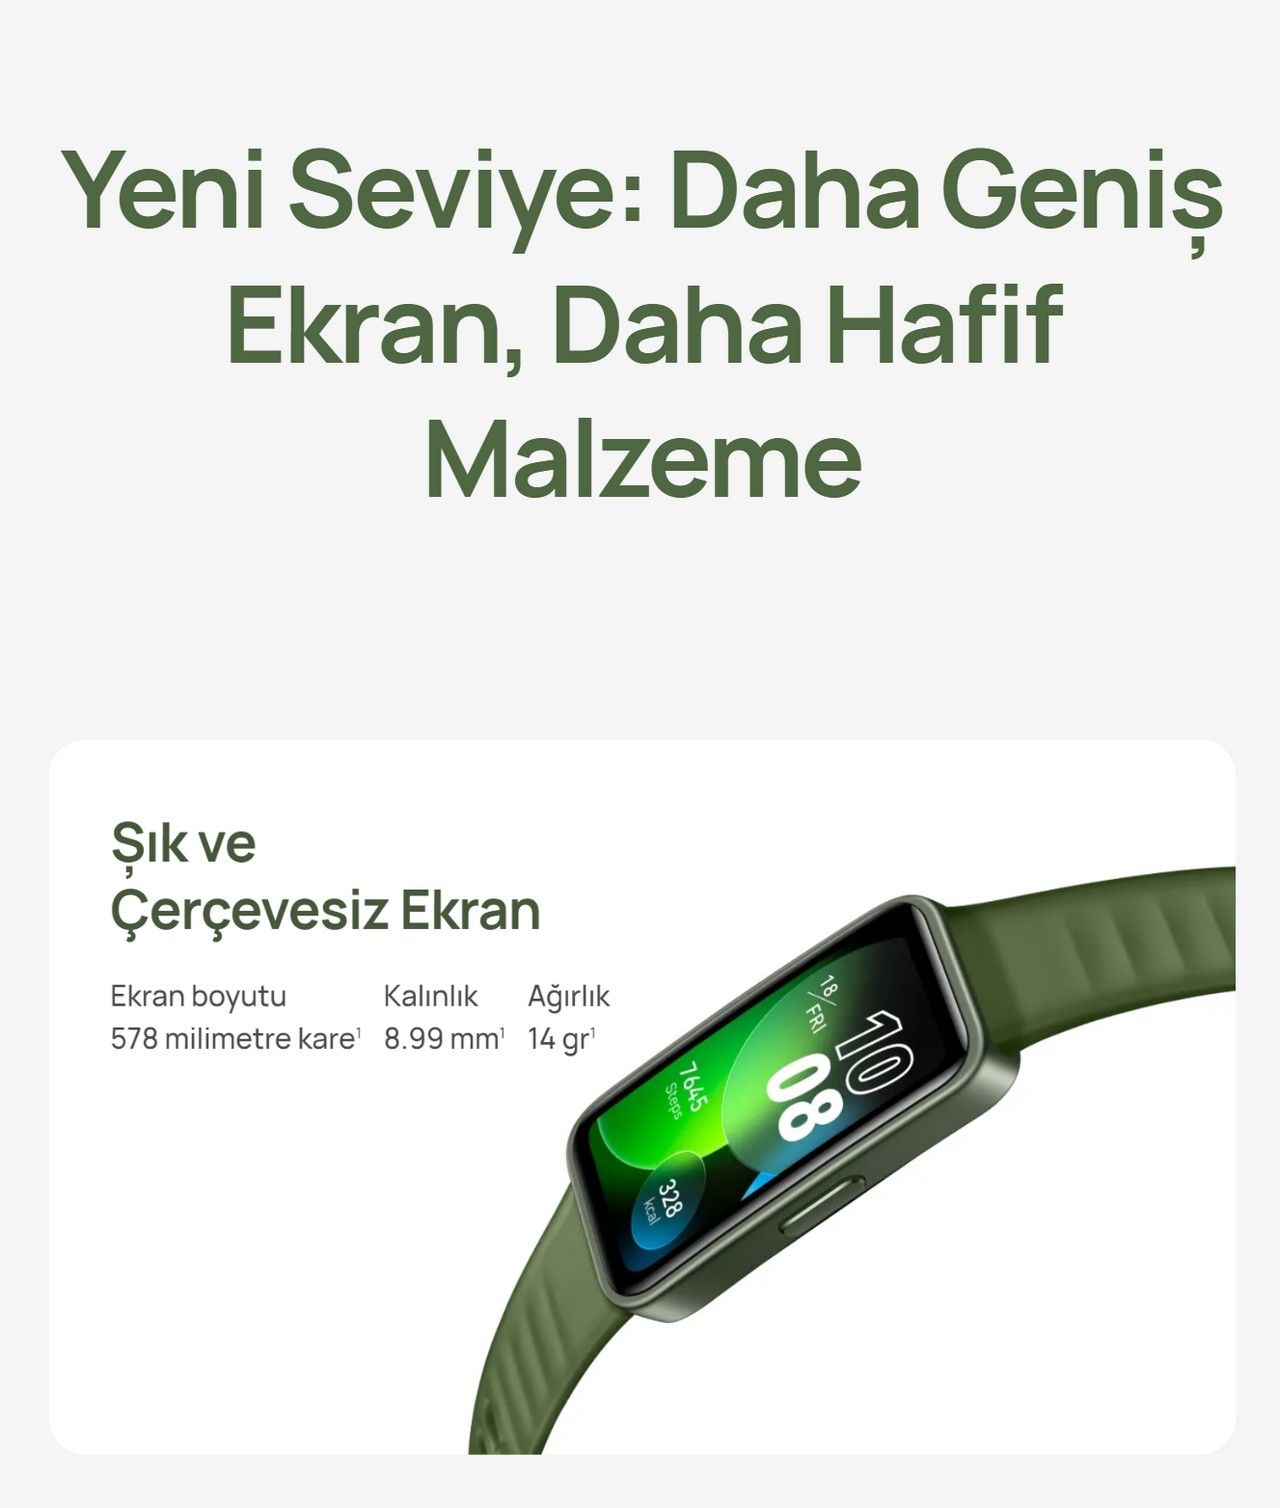 Kupa Huawei Band 8 Compatible Colorful Classic Silicone Band A+ Dark Green  - Trendyol